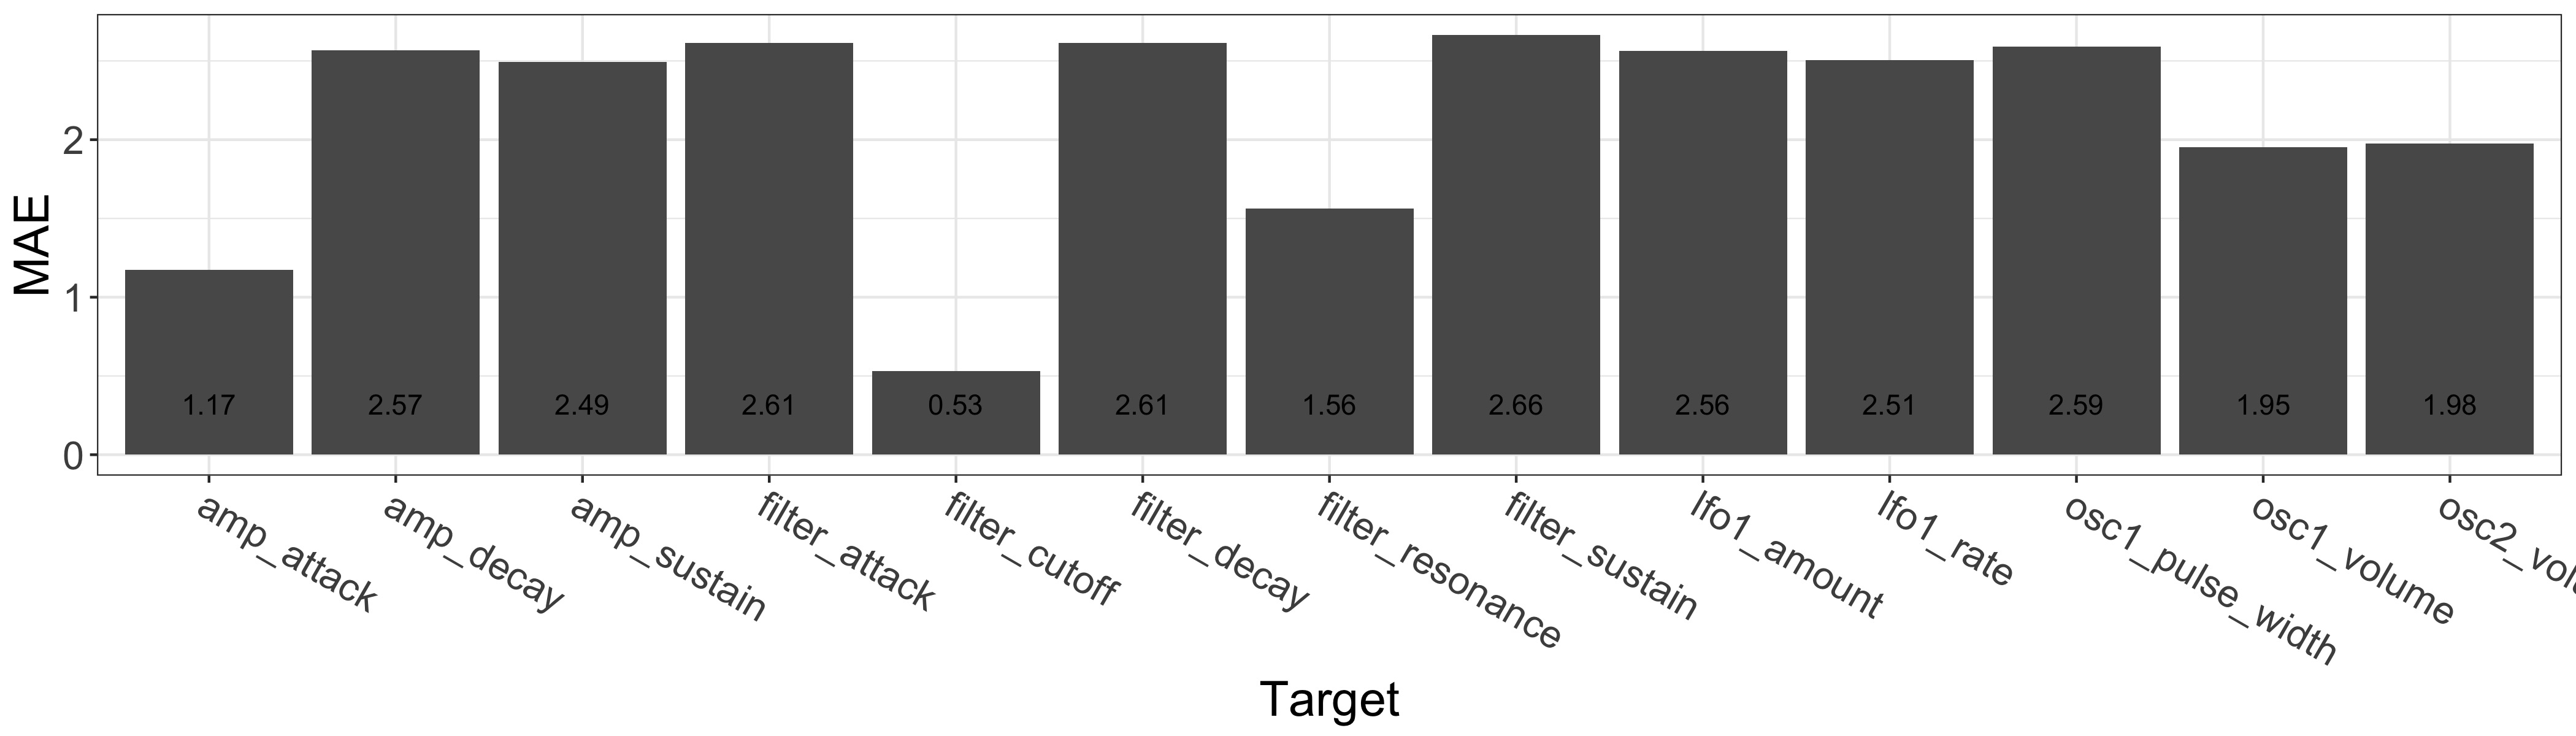 Regression Accuracy for the Noisemaker Dataset